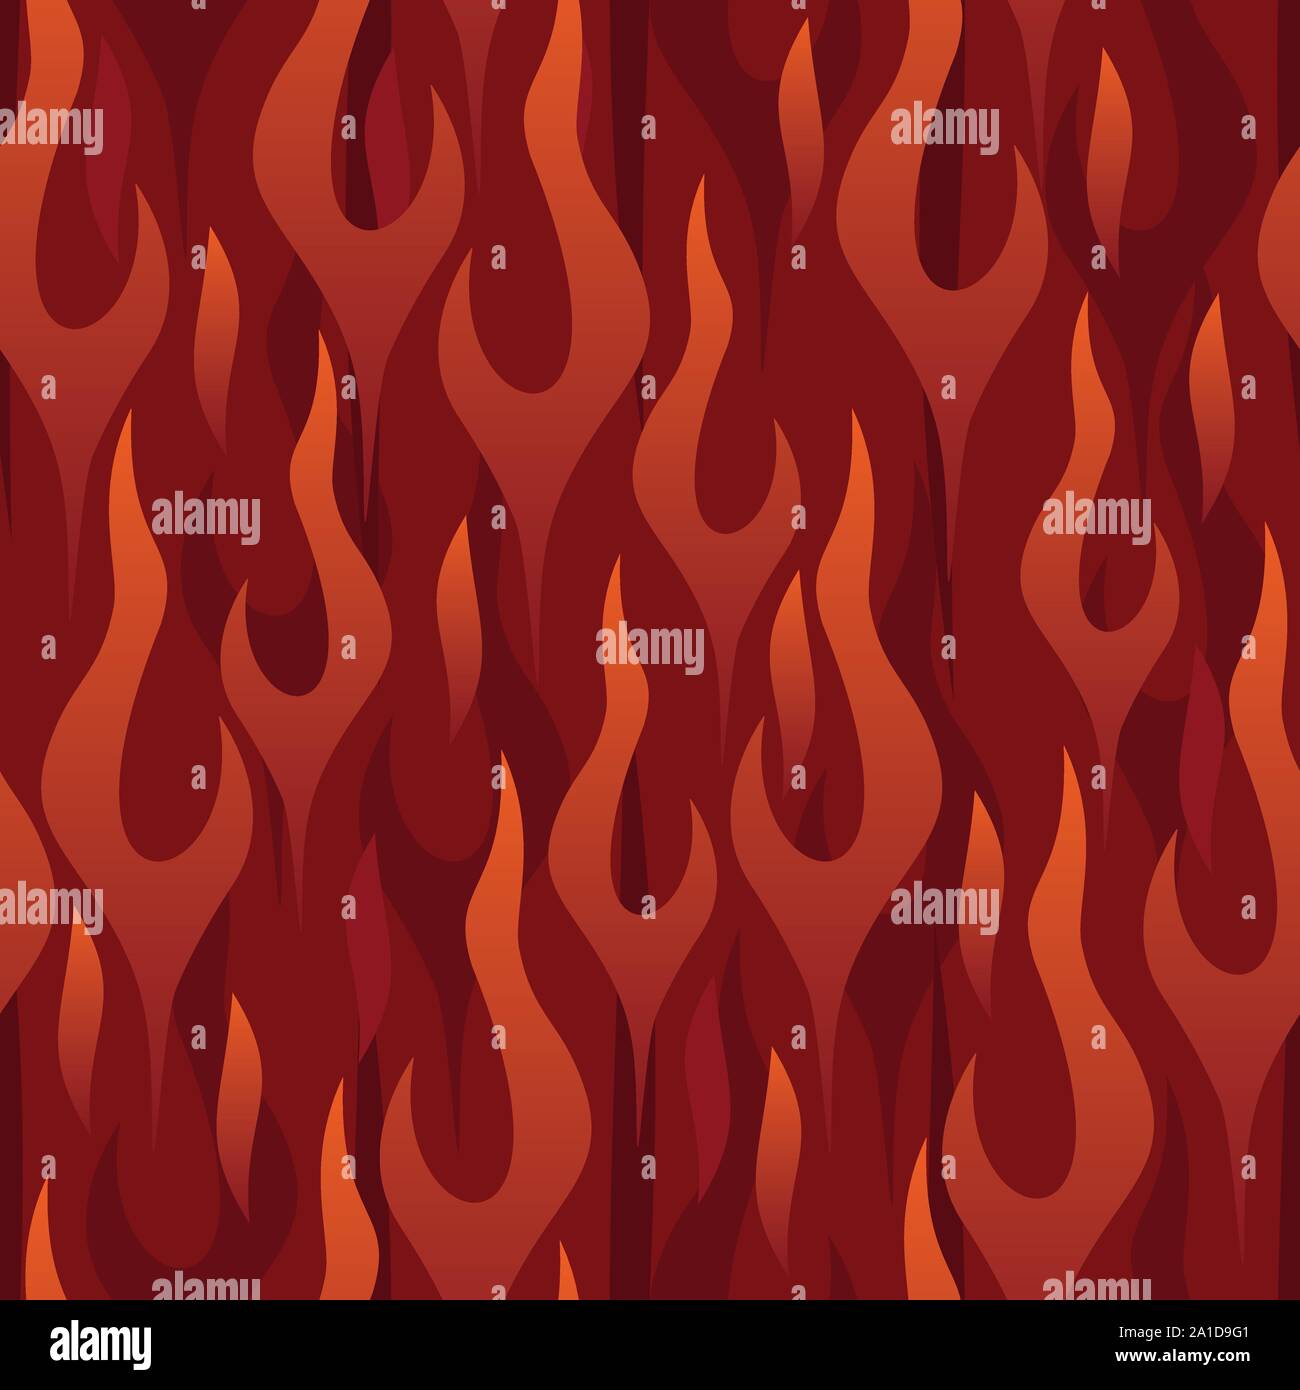 Red Flames Seamless Repeating Pattern Vector Illustration Stock Vector